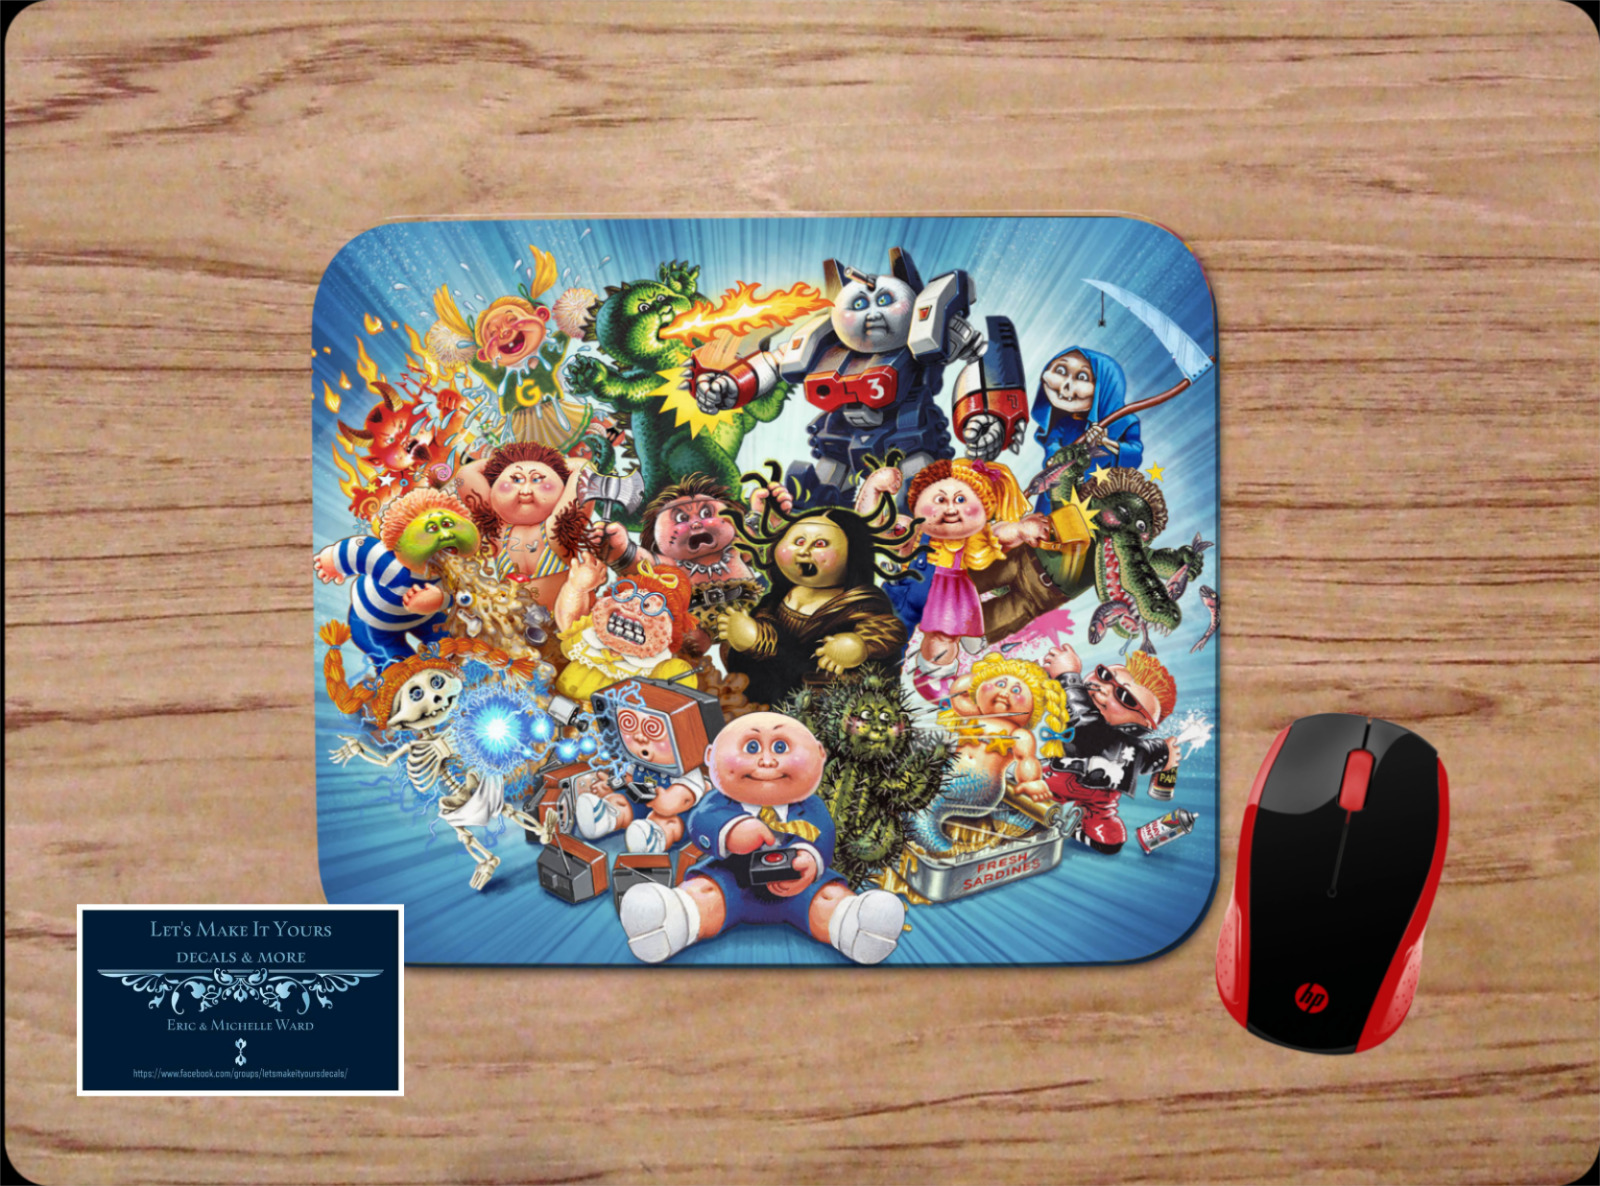 GARBAGE PAIL KIDS INSPIRED ART CUSTOM PC DESK MAT MOUSE PAD 80s CLASSIC TOYS